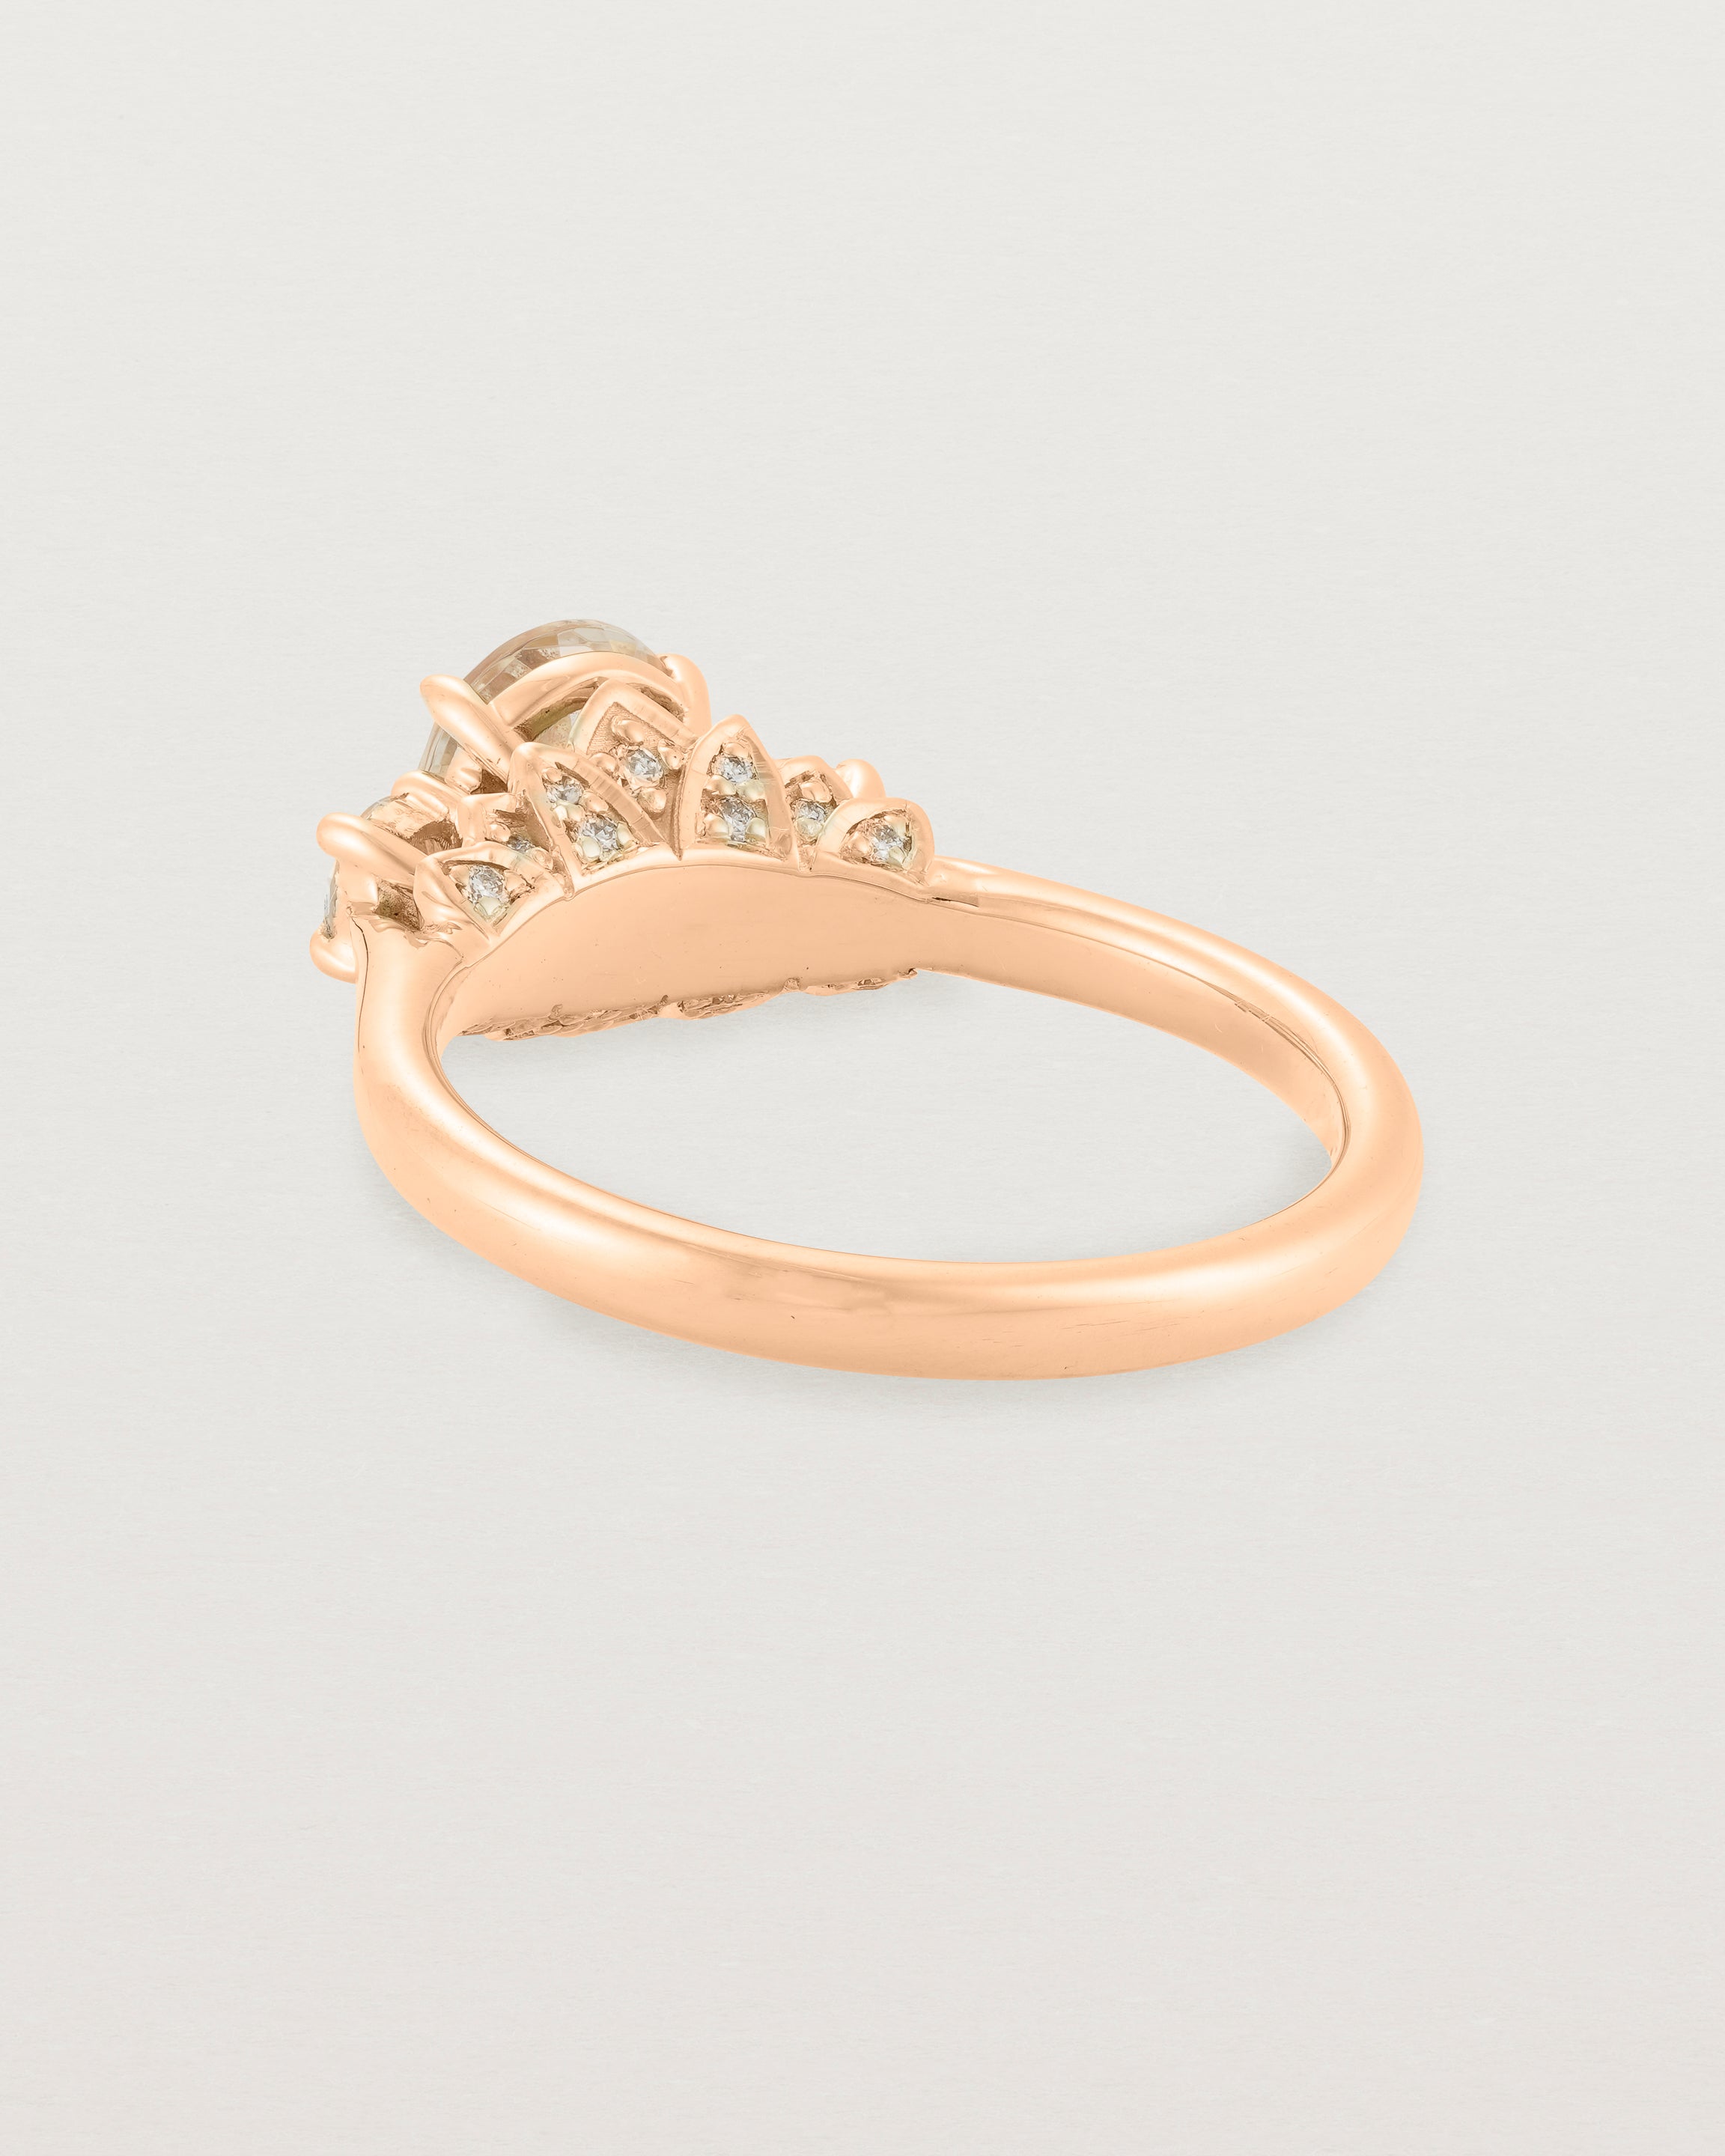 Back view of the Laurel Oval Trio Ring | Savannah Sunstone | Rose Gold.